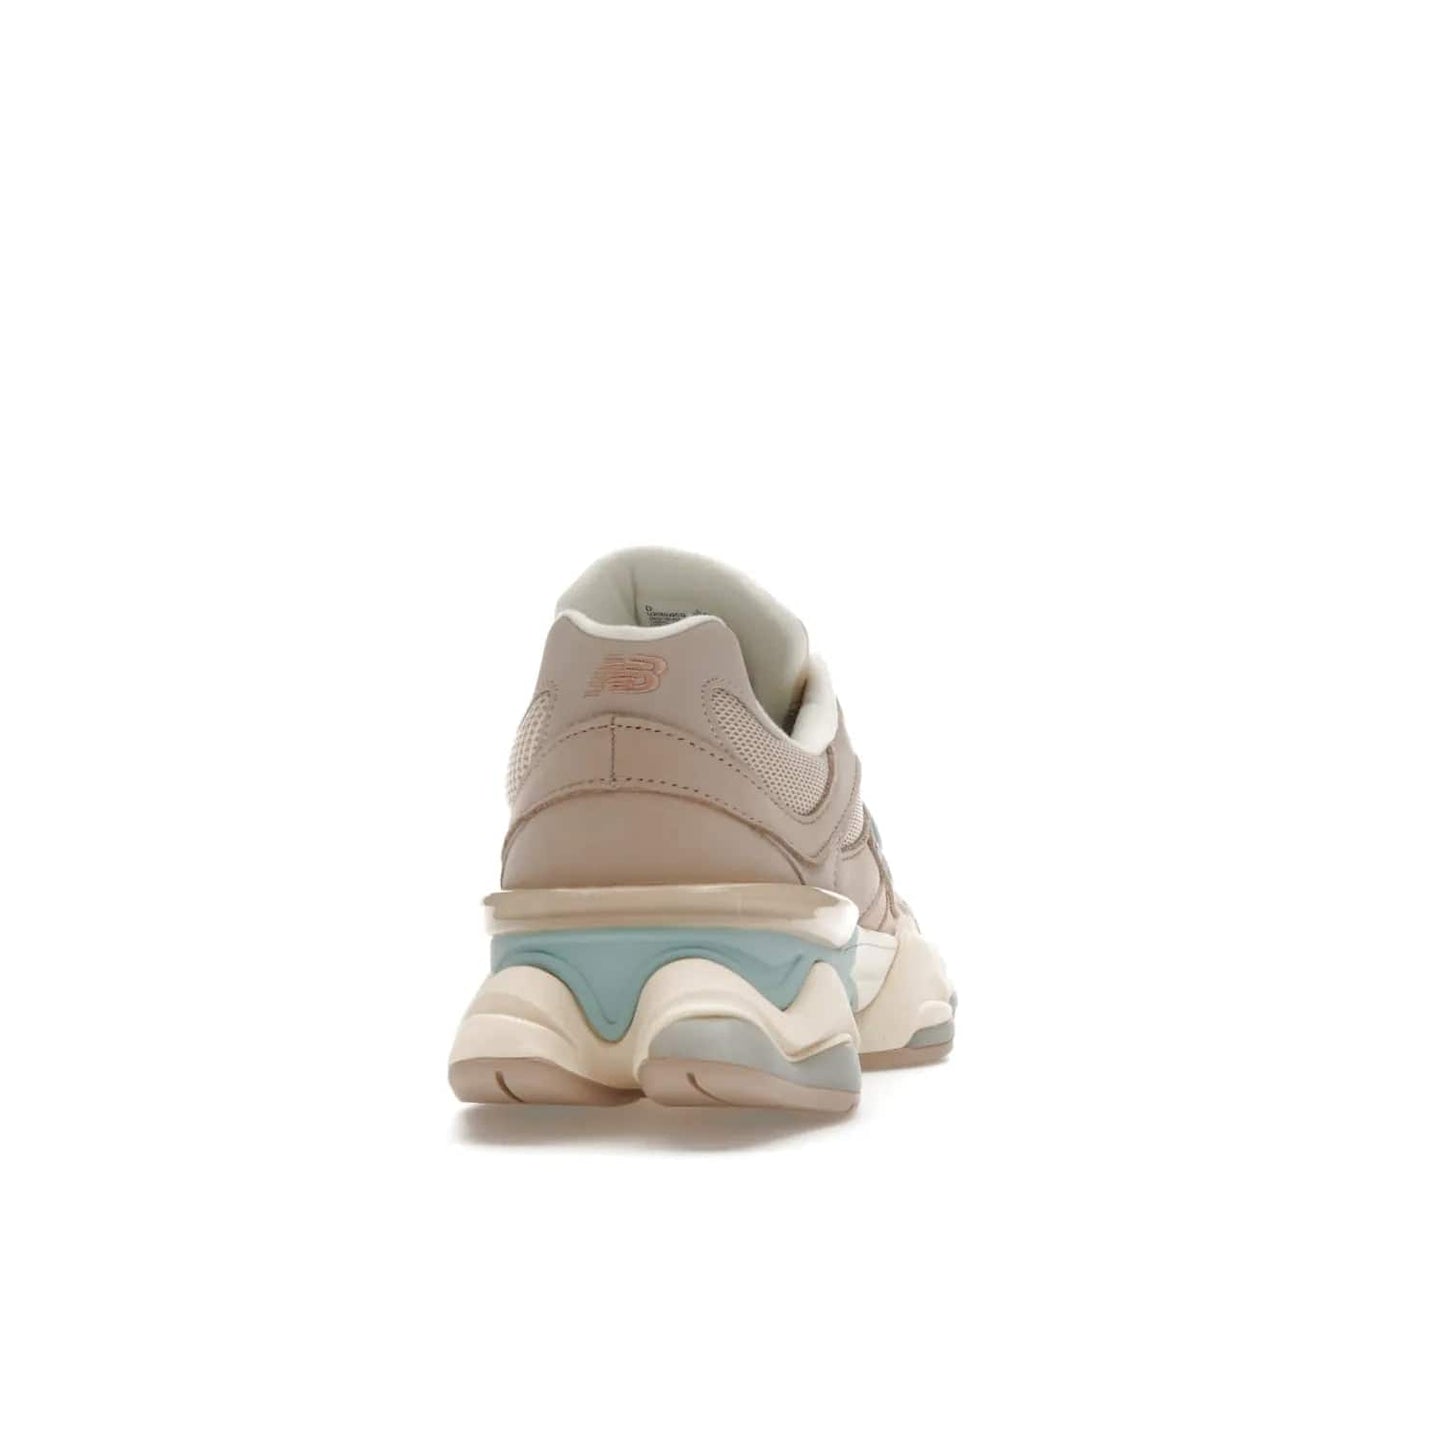 New Balance 9060 Ivory Cream Pink Sand - Image 29 - Only at www.BallersClubKickz.com - New Balance 9060 Ivory Cream Pink Sand - Sleek meshed upper, premium suede overlays, ABZORB cushioning. Get this unique sneaker ahead of the trend, launching December 6th, 2022!